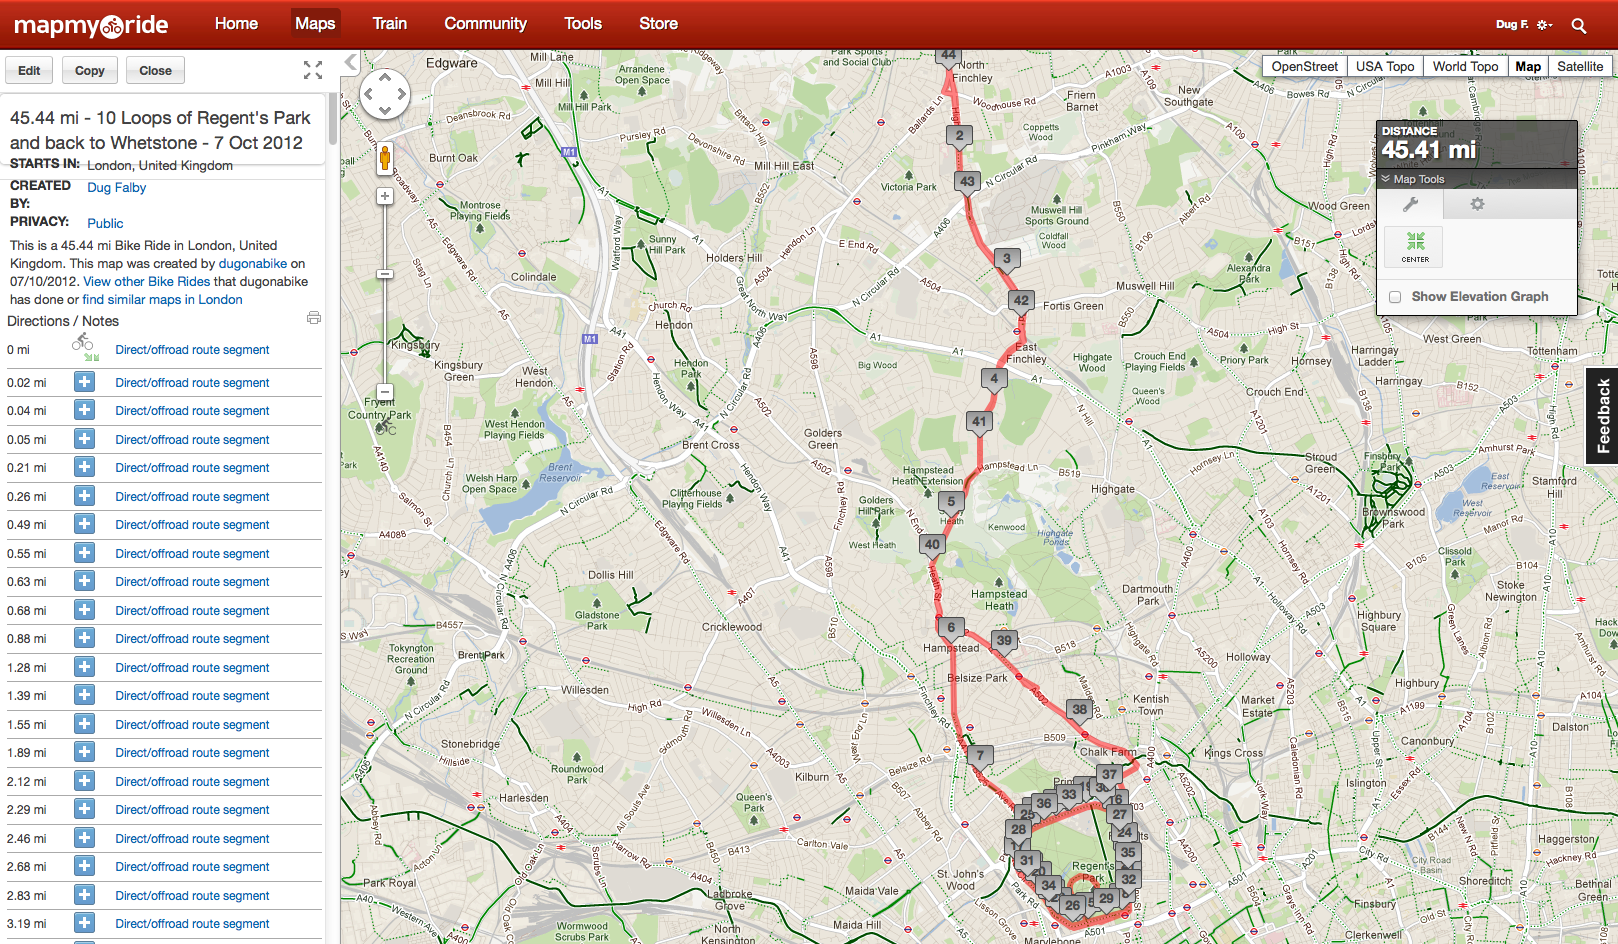 45.44 miles -- -) Looping Regents Park and back to Whetstone